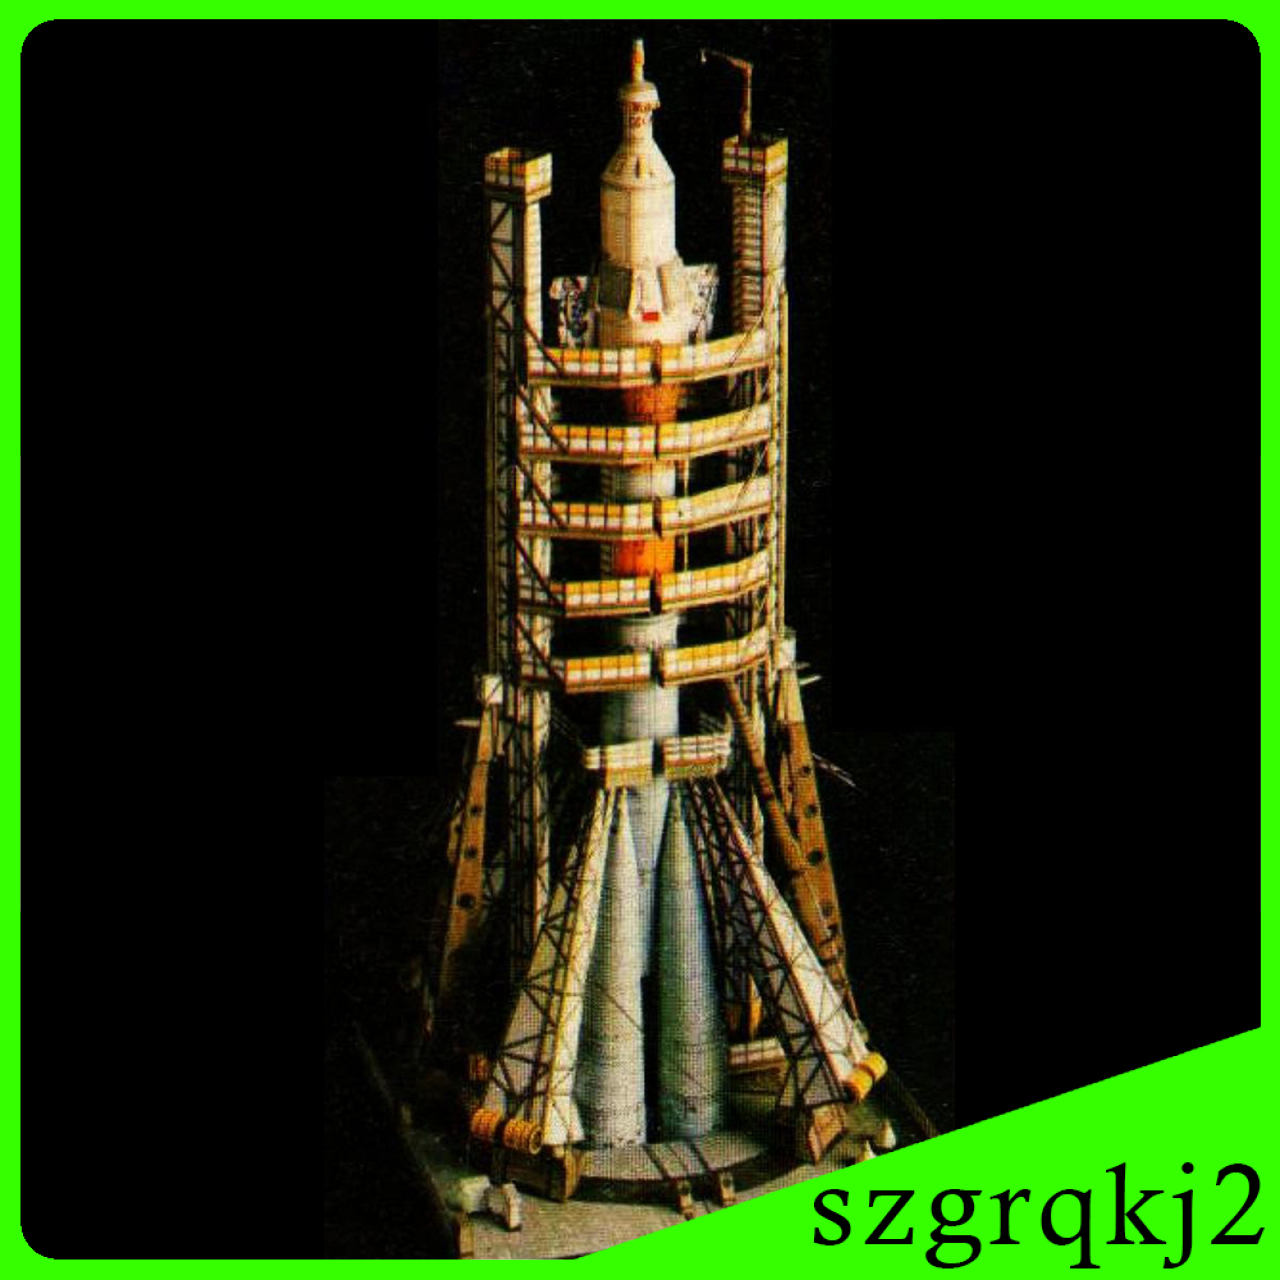 Newest 1:80 Scale Russian Soyuz Carrier Rocket and Launch Pad to Build 3D Model Kit